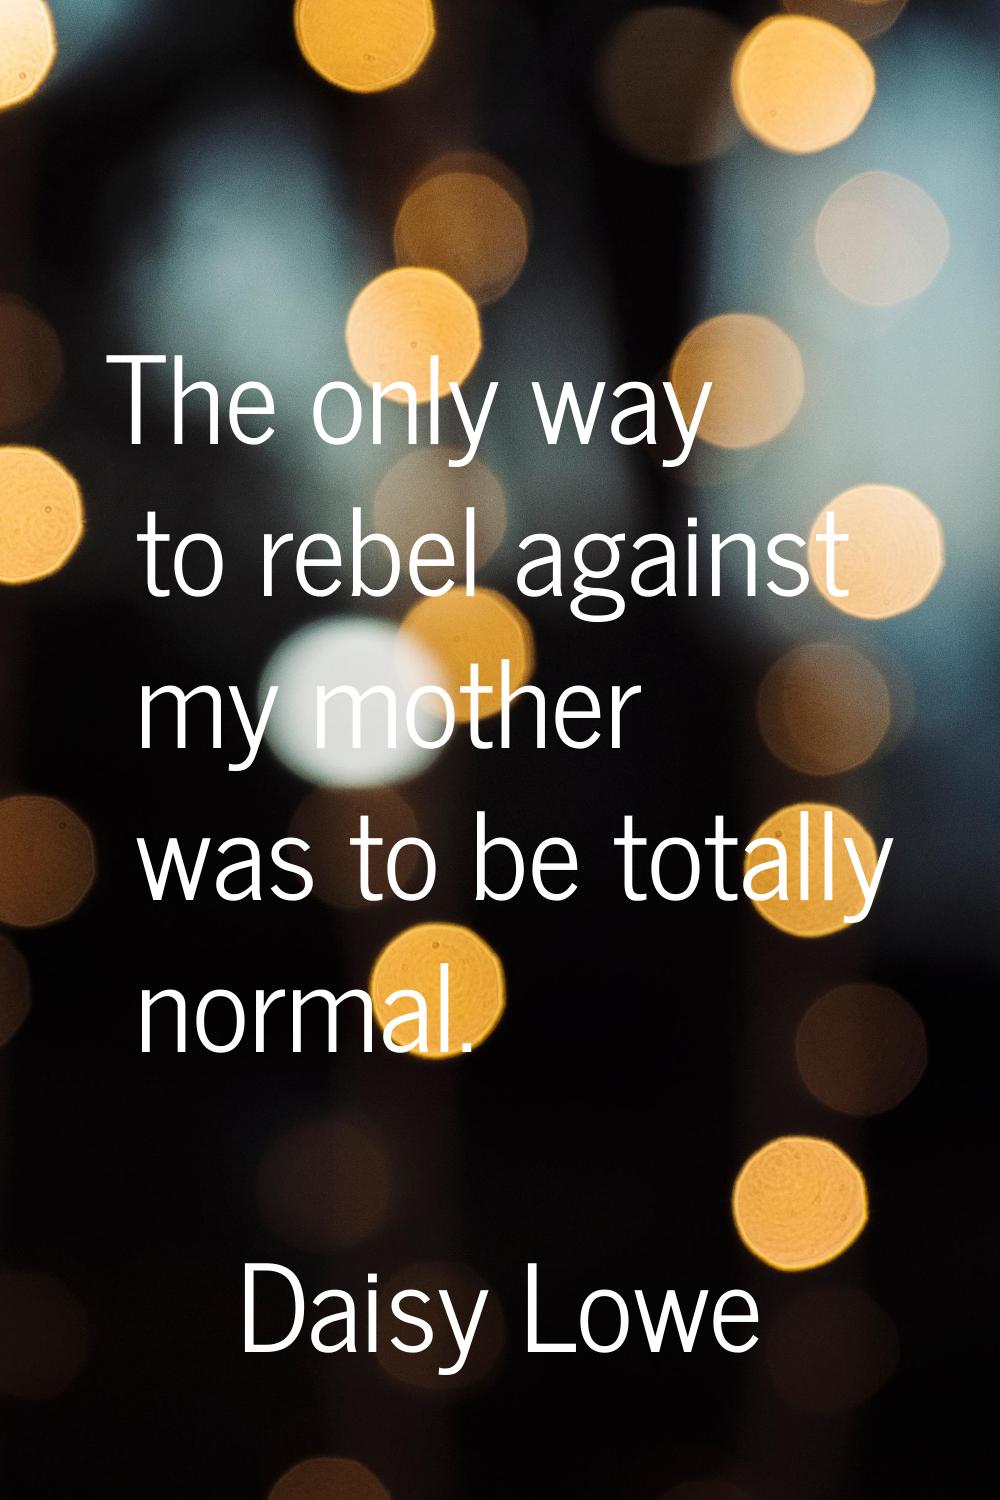 The only way to rebel against my mother was to be totally normal.